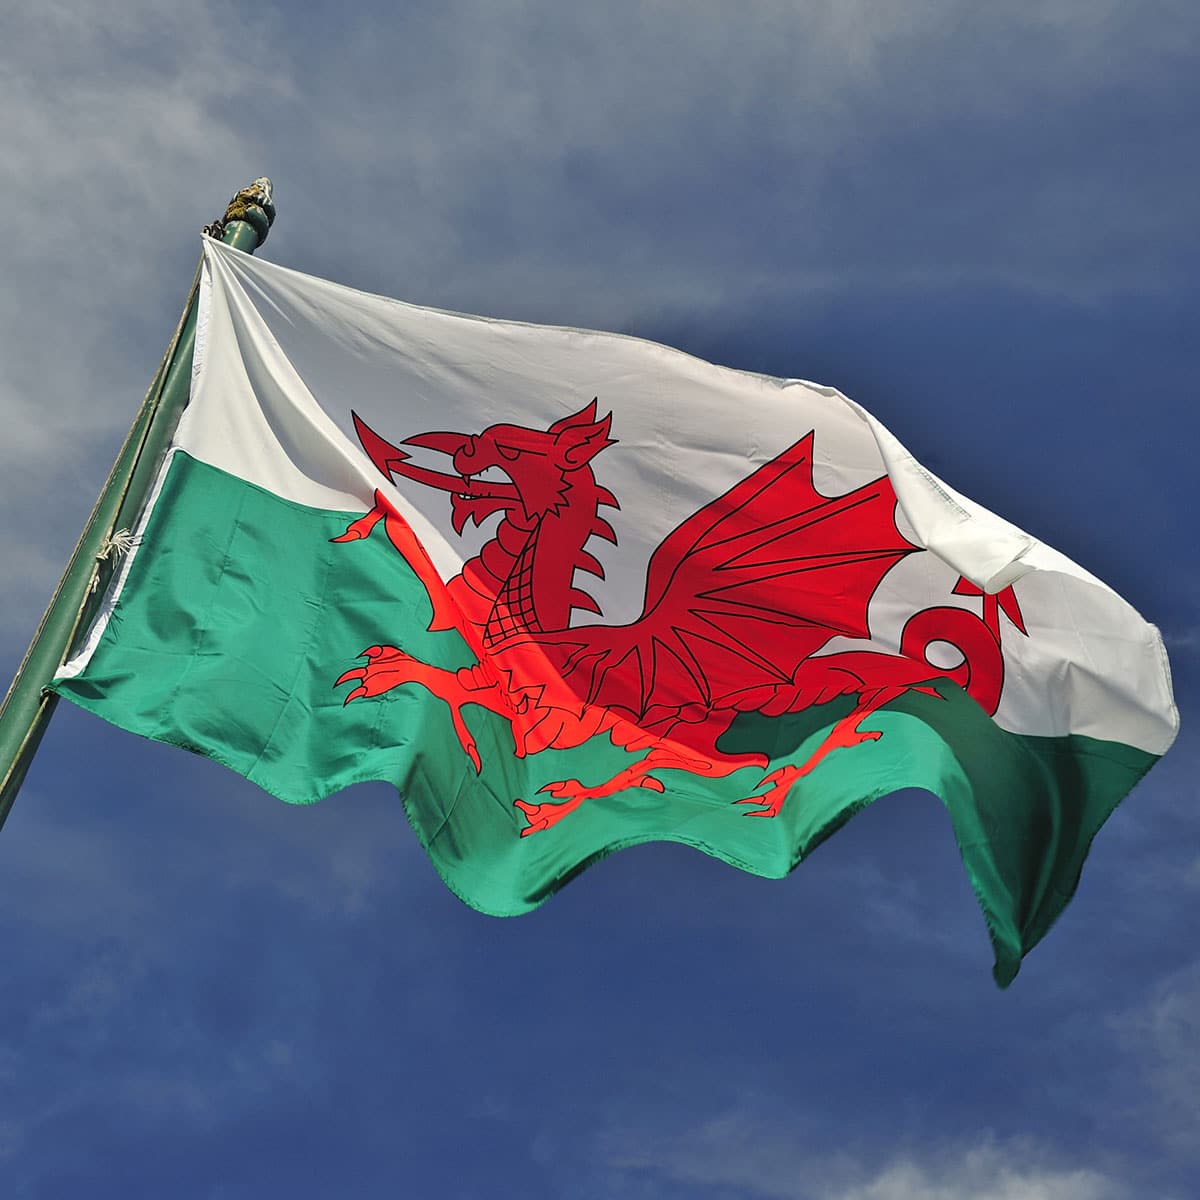 Welsh Dragon Flag flapping in the wind in a blue sky